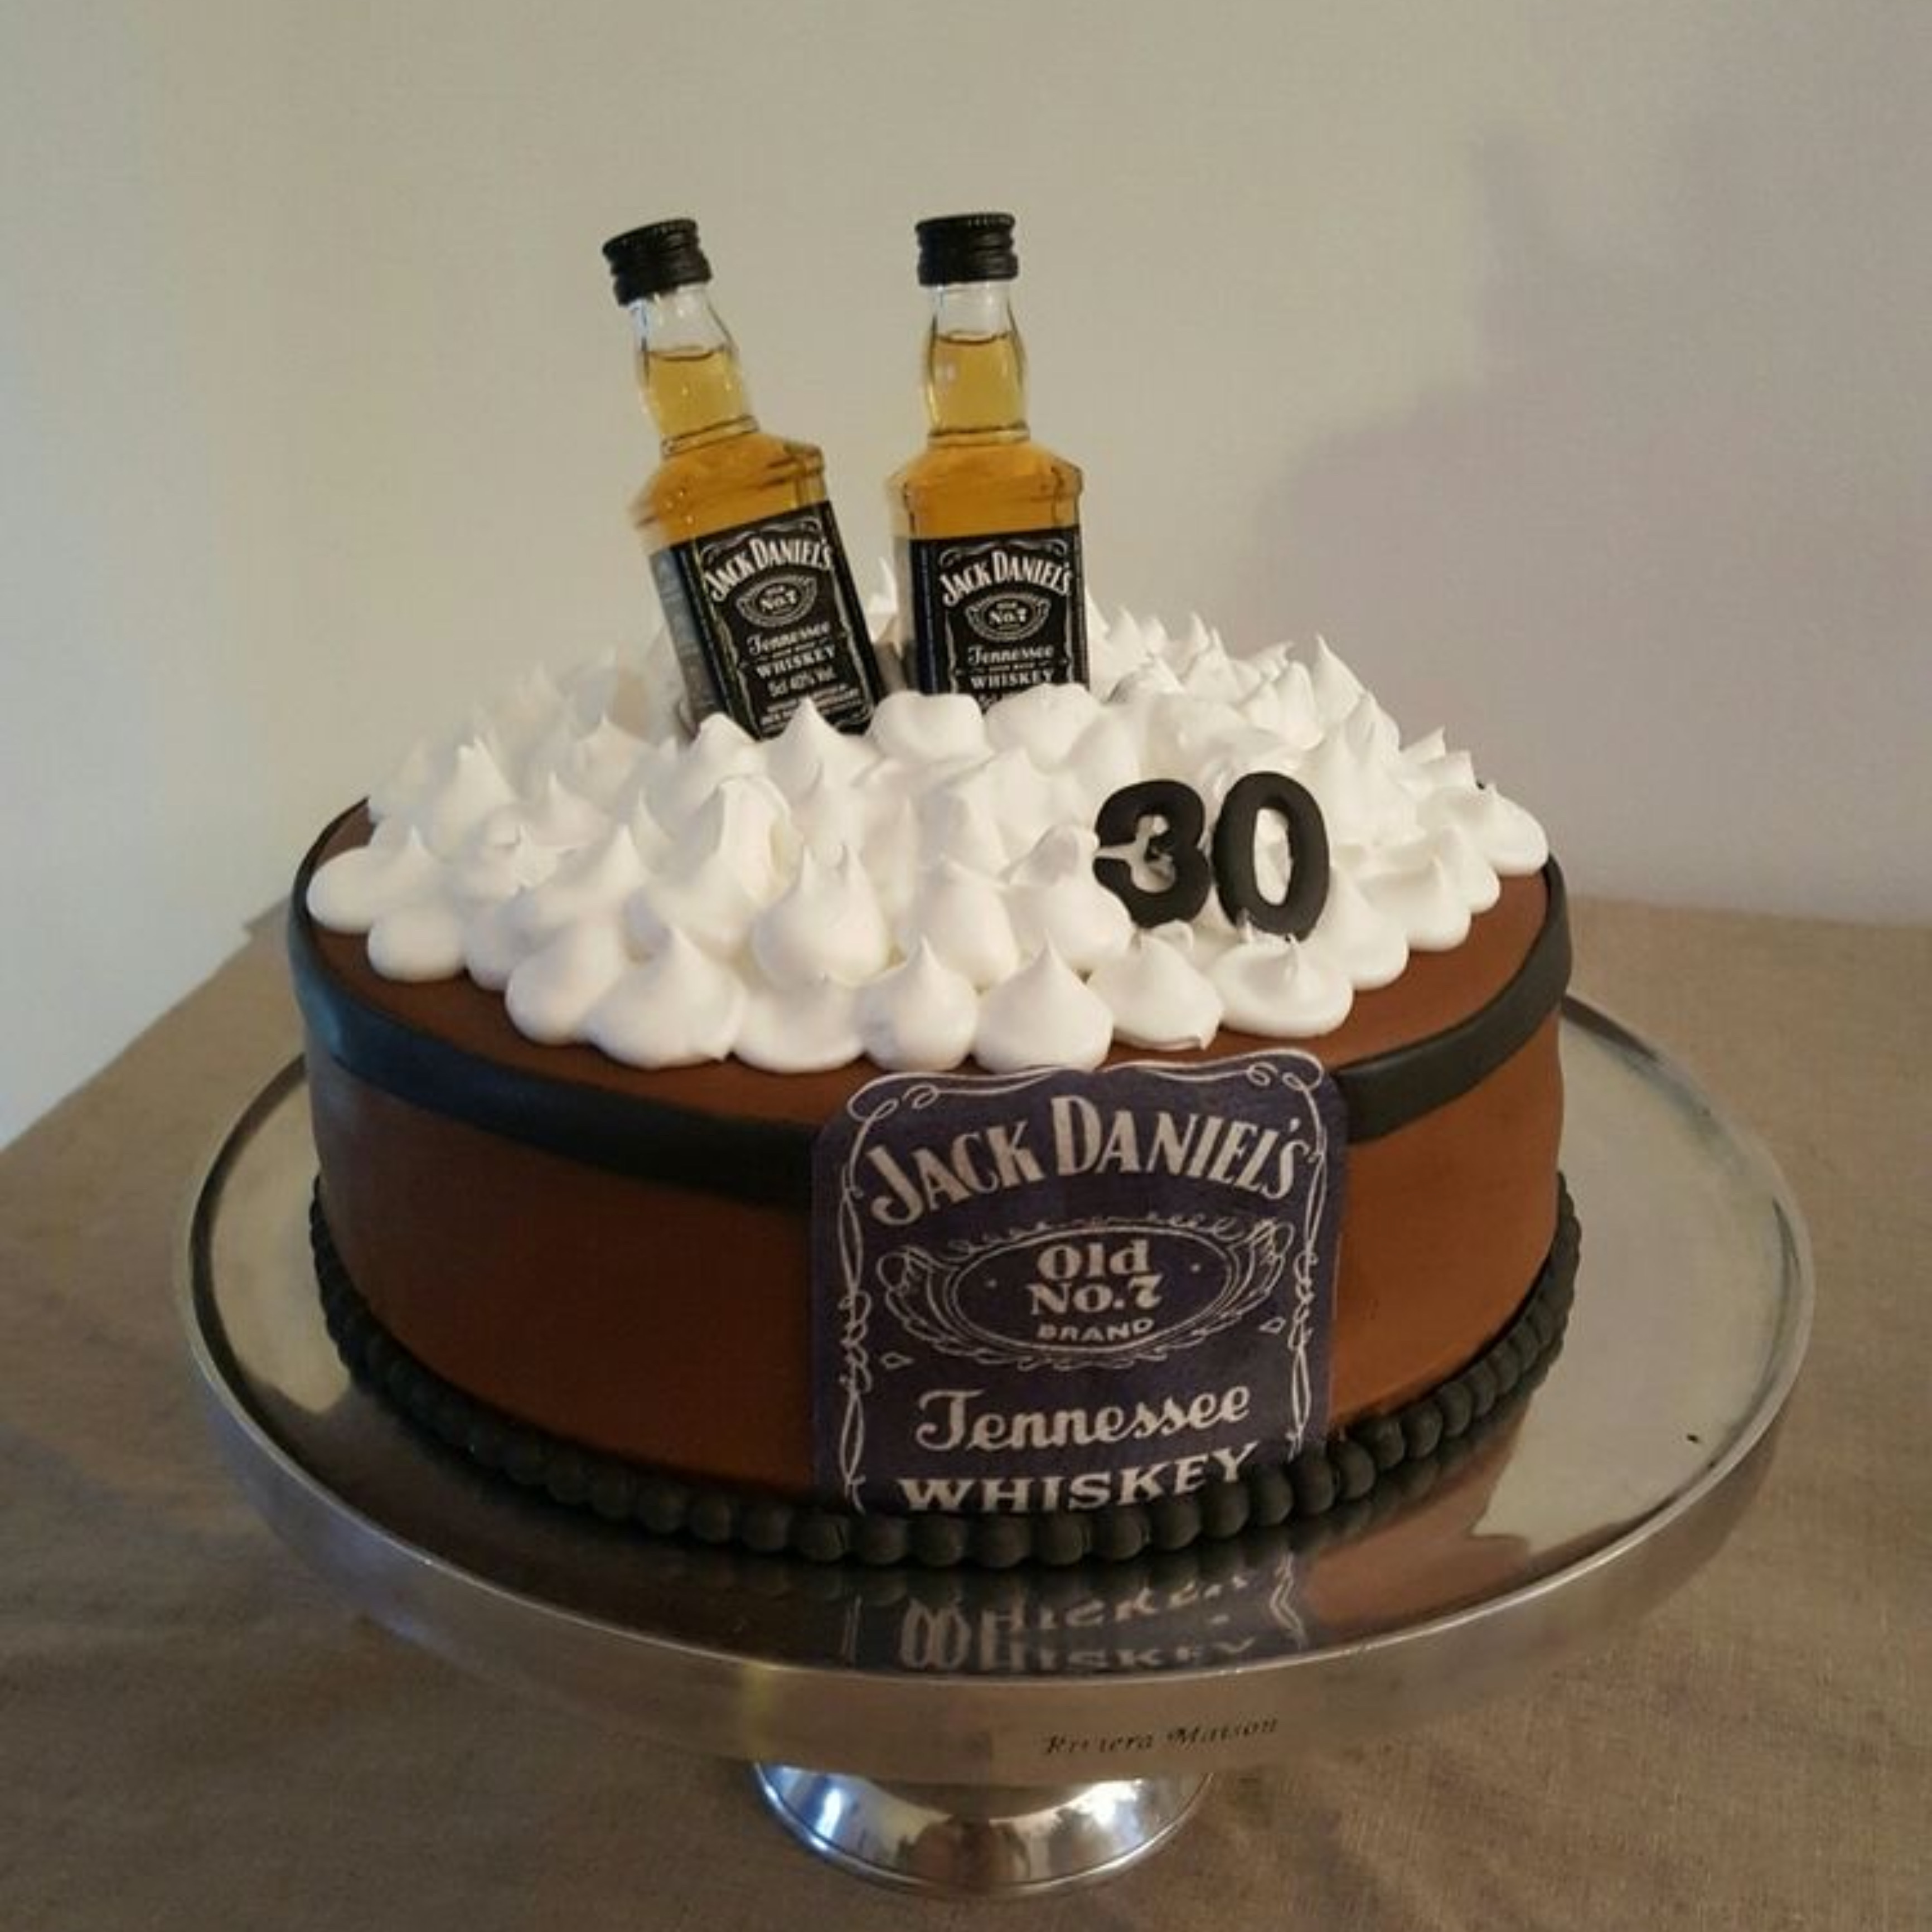 Jack Daniels And Absolut Vodka Fondant Cake 5 Kg  GiftSend New Year Gifts  Online HD1110615 IGPcom